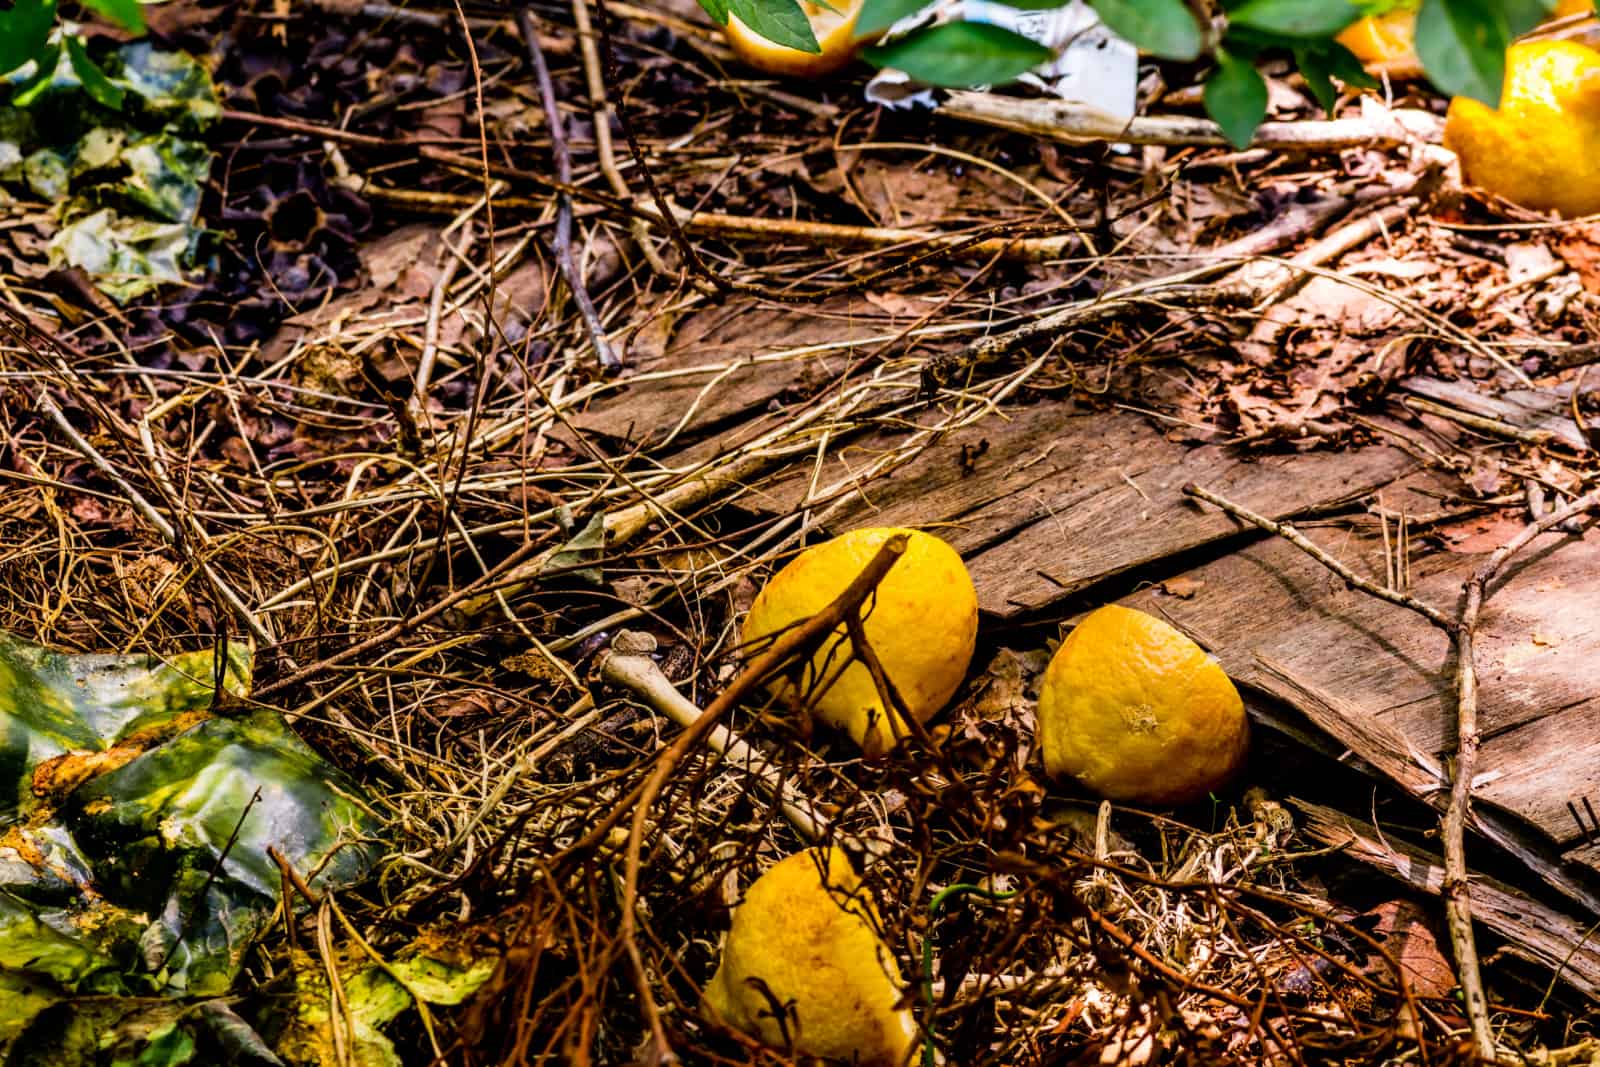 Lemon rinds scattered on ground among dried twigs and green leaves.